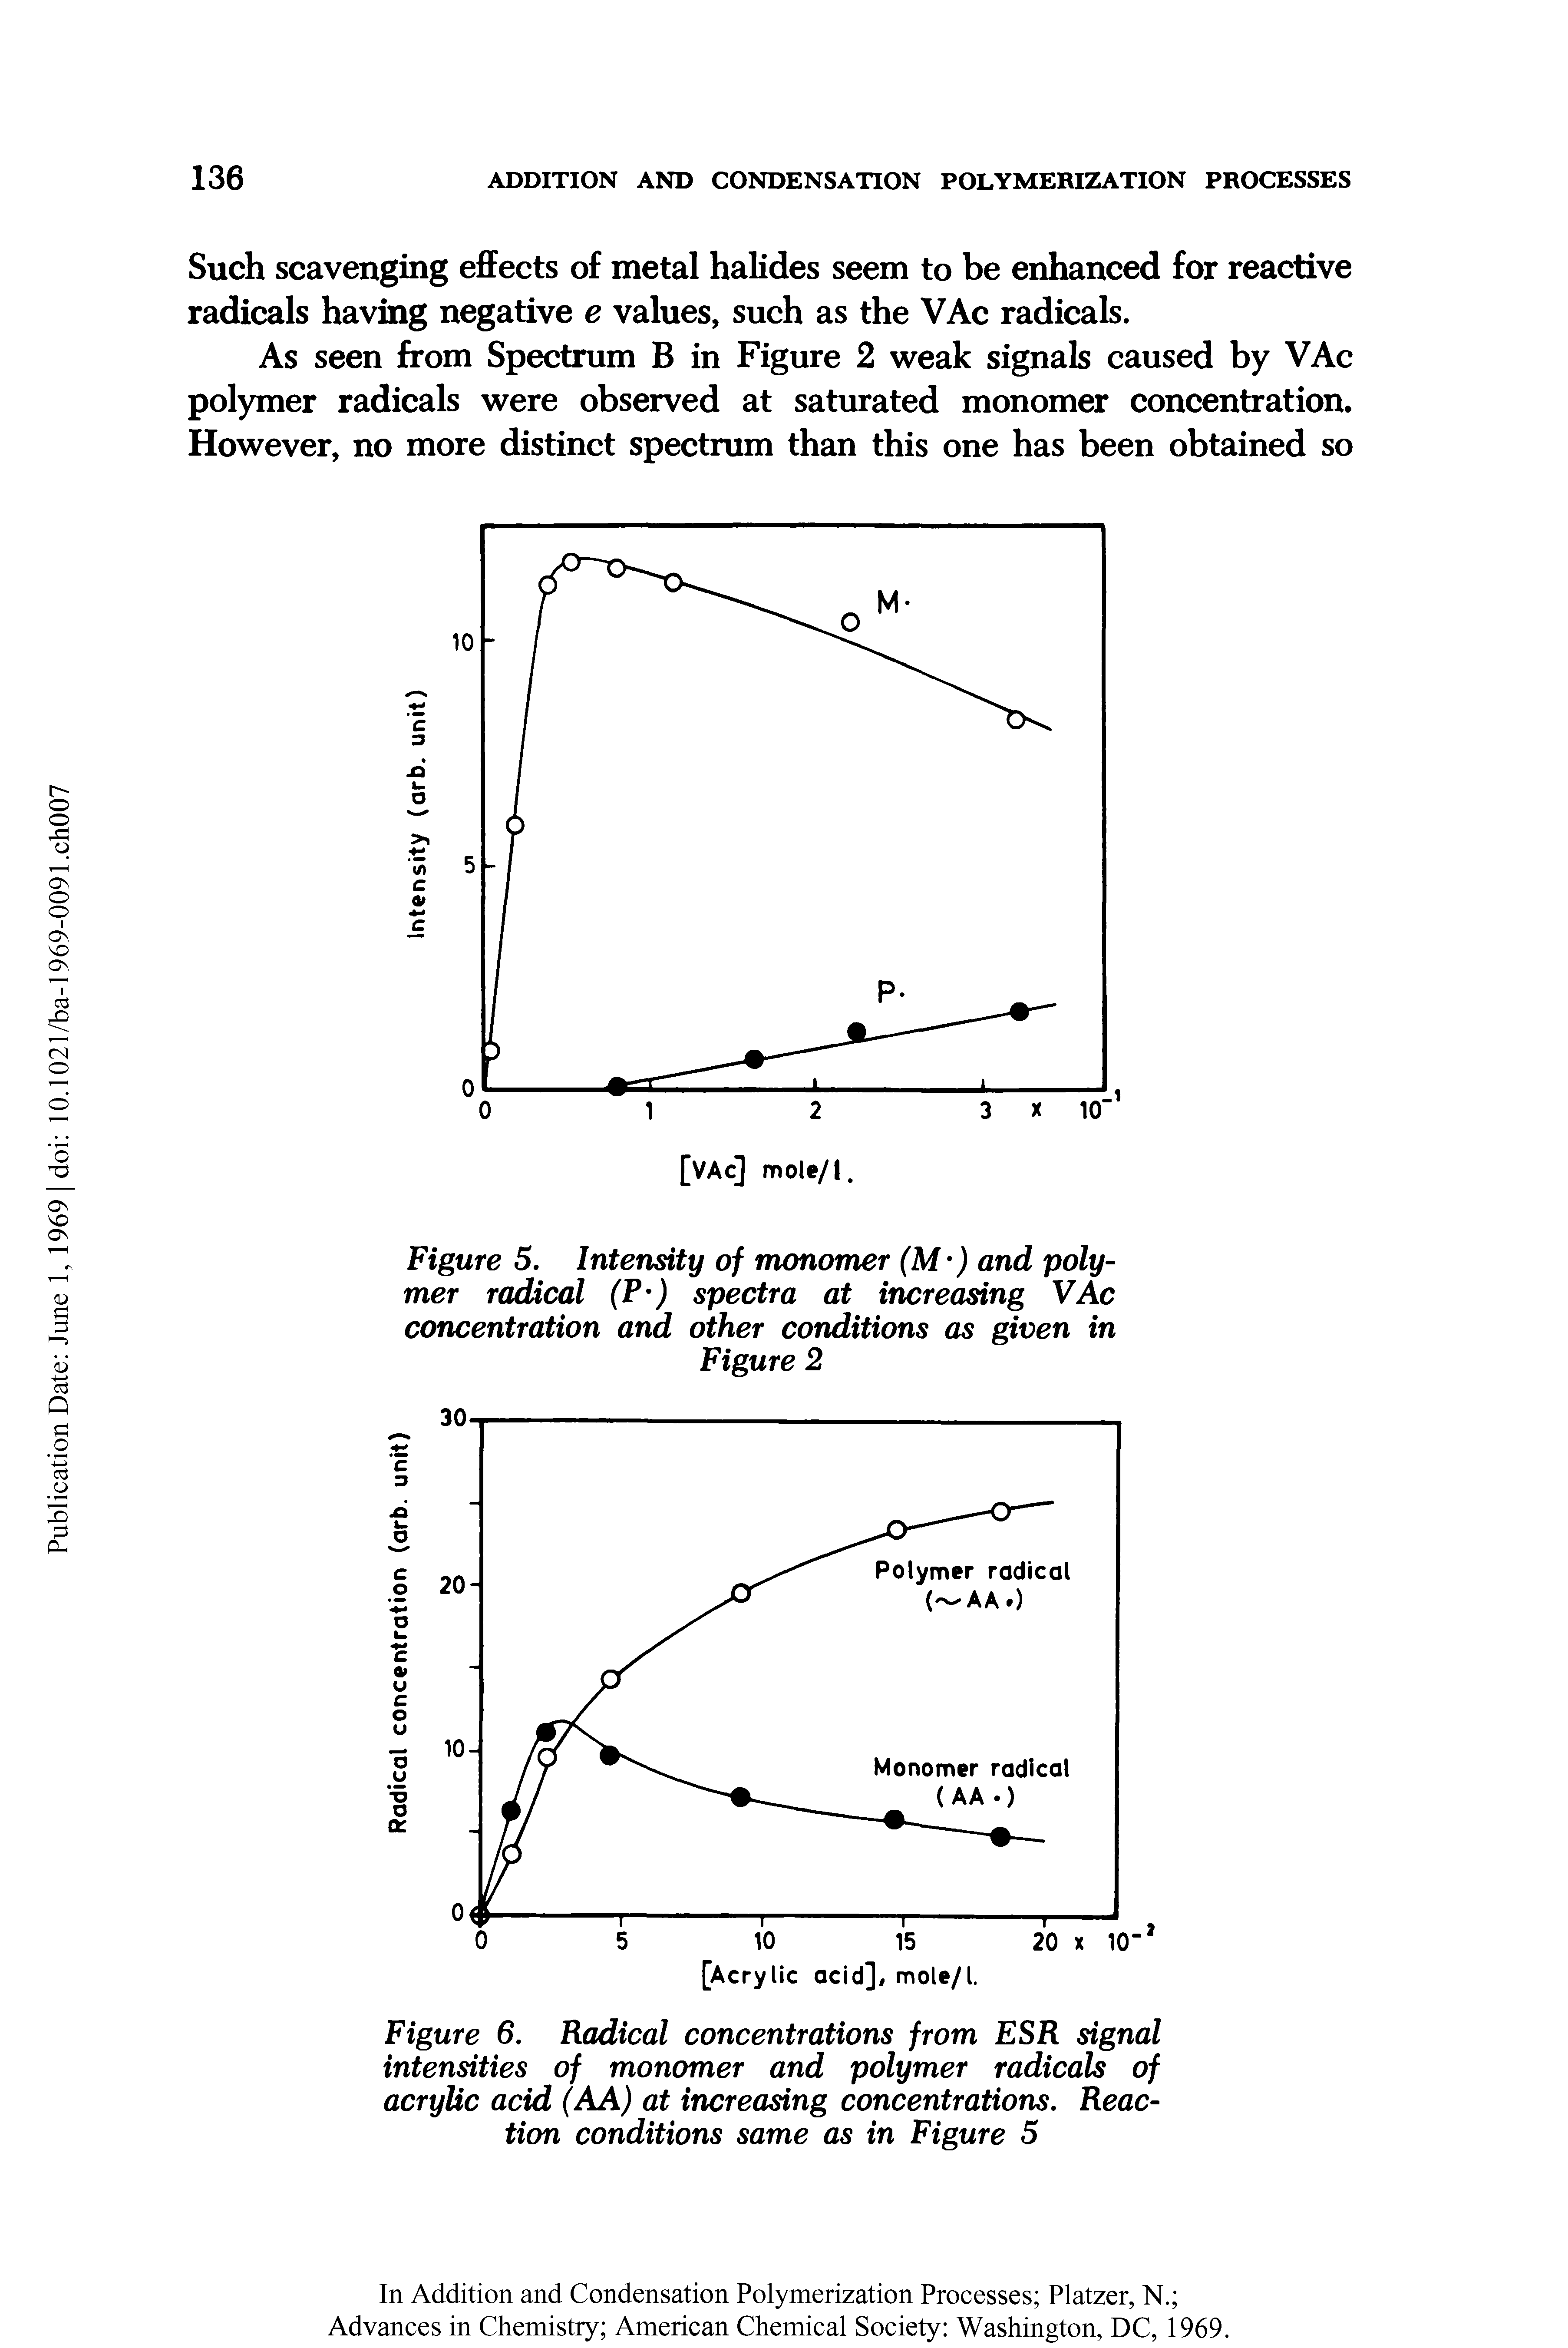 Figure 6. Radical concentrations from ESR signal intensities of monomer and polymer radicals of acrylic acid (AA) at increasing concentrations. Reaction conditions same as in Figure 5...